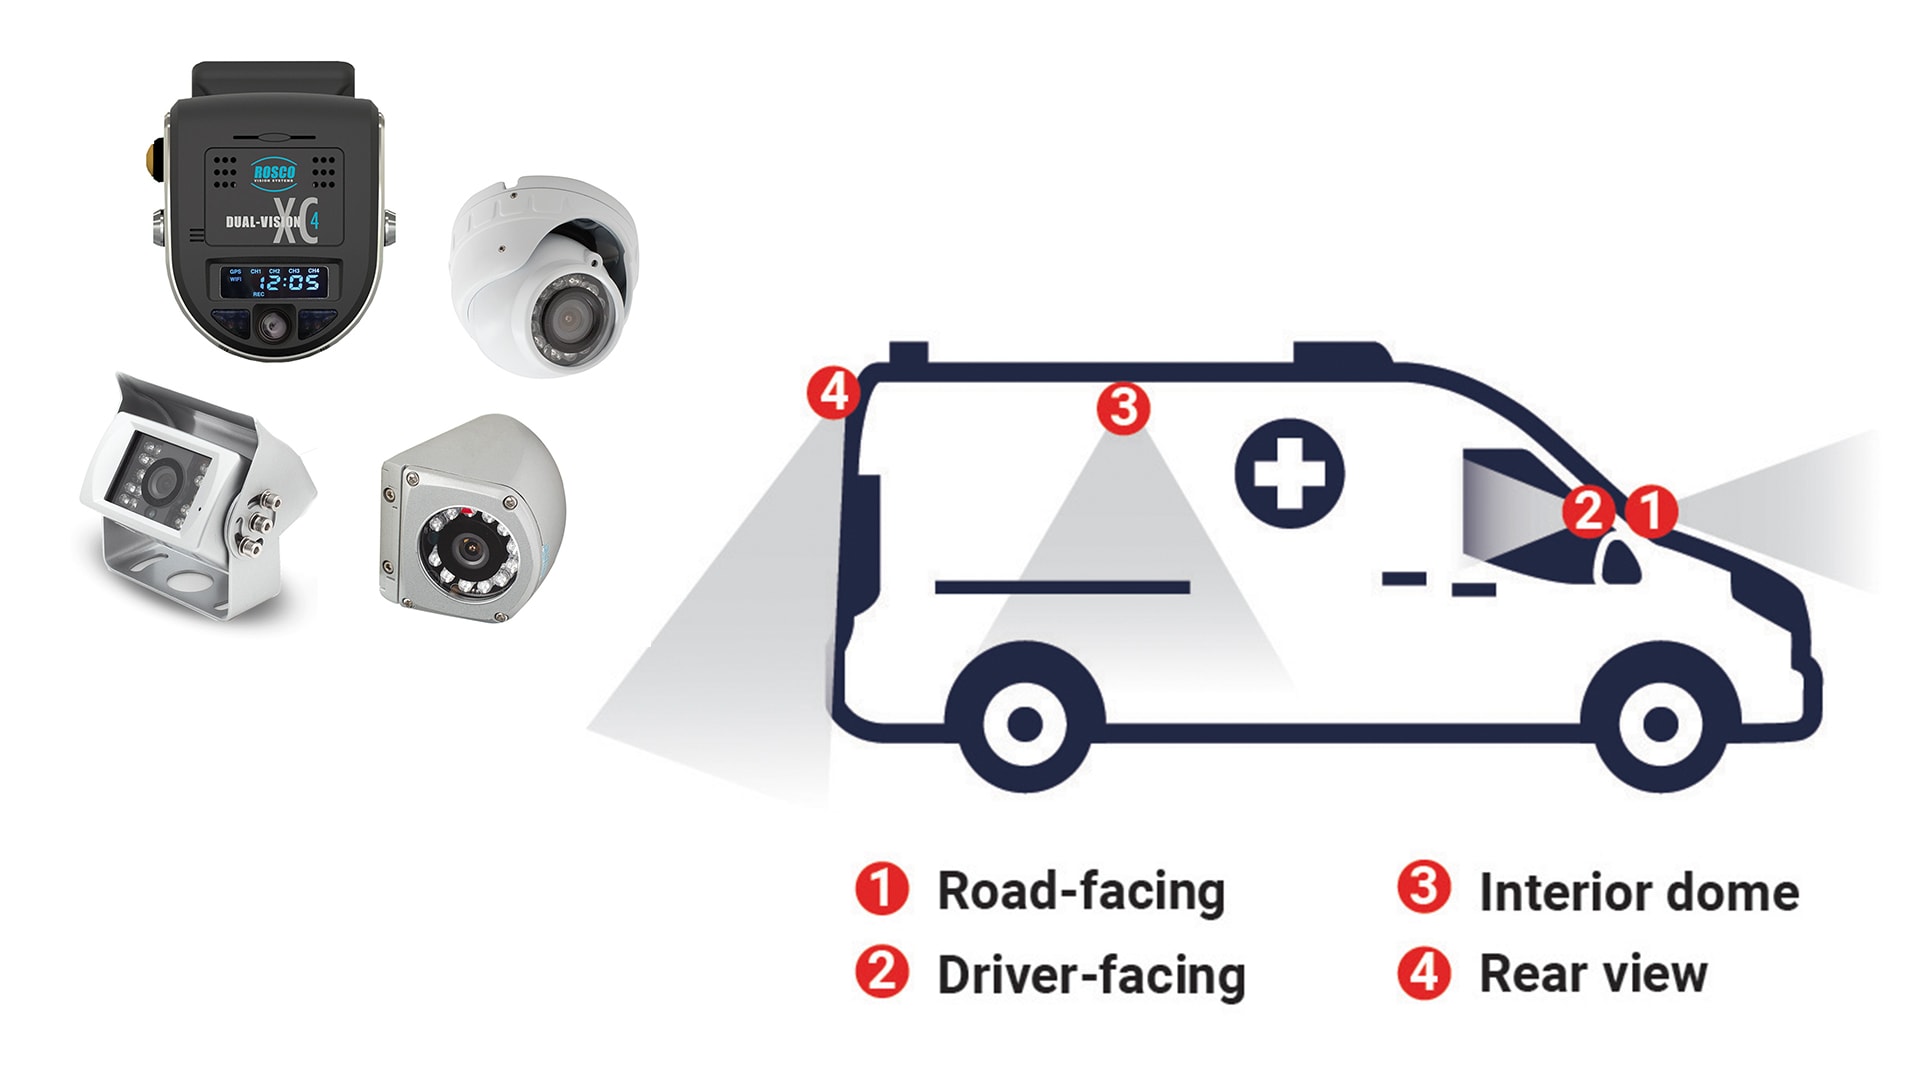 StreetEagle offers multiple camera solutions for better coverage with EMS fleet management